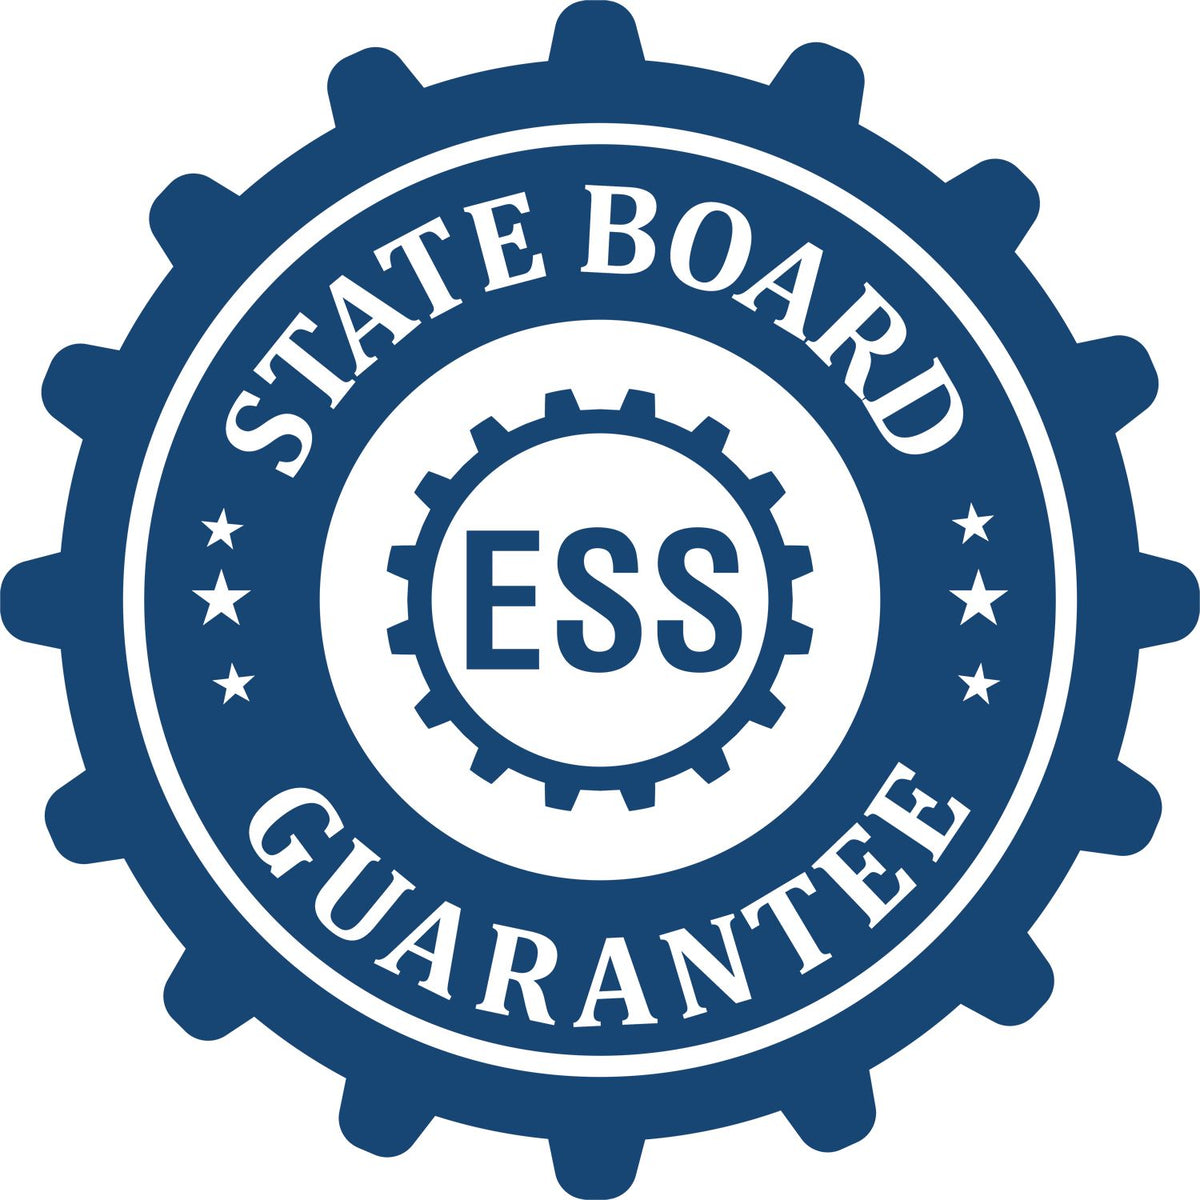 An emblem in a gear shape illustrating a state board guarantee for the Gift Tennessee Landscape Architect Seal